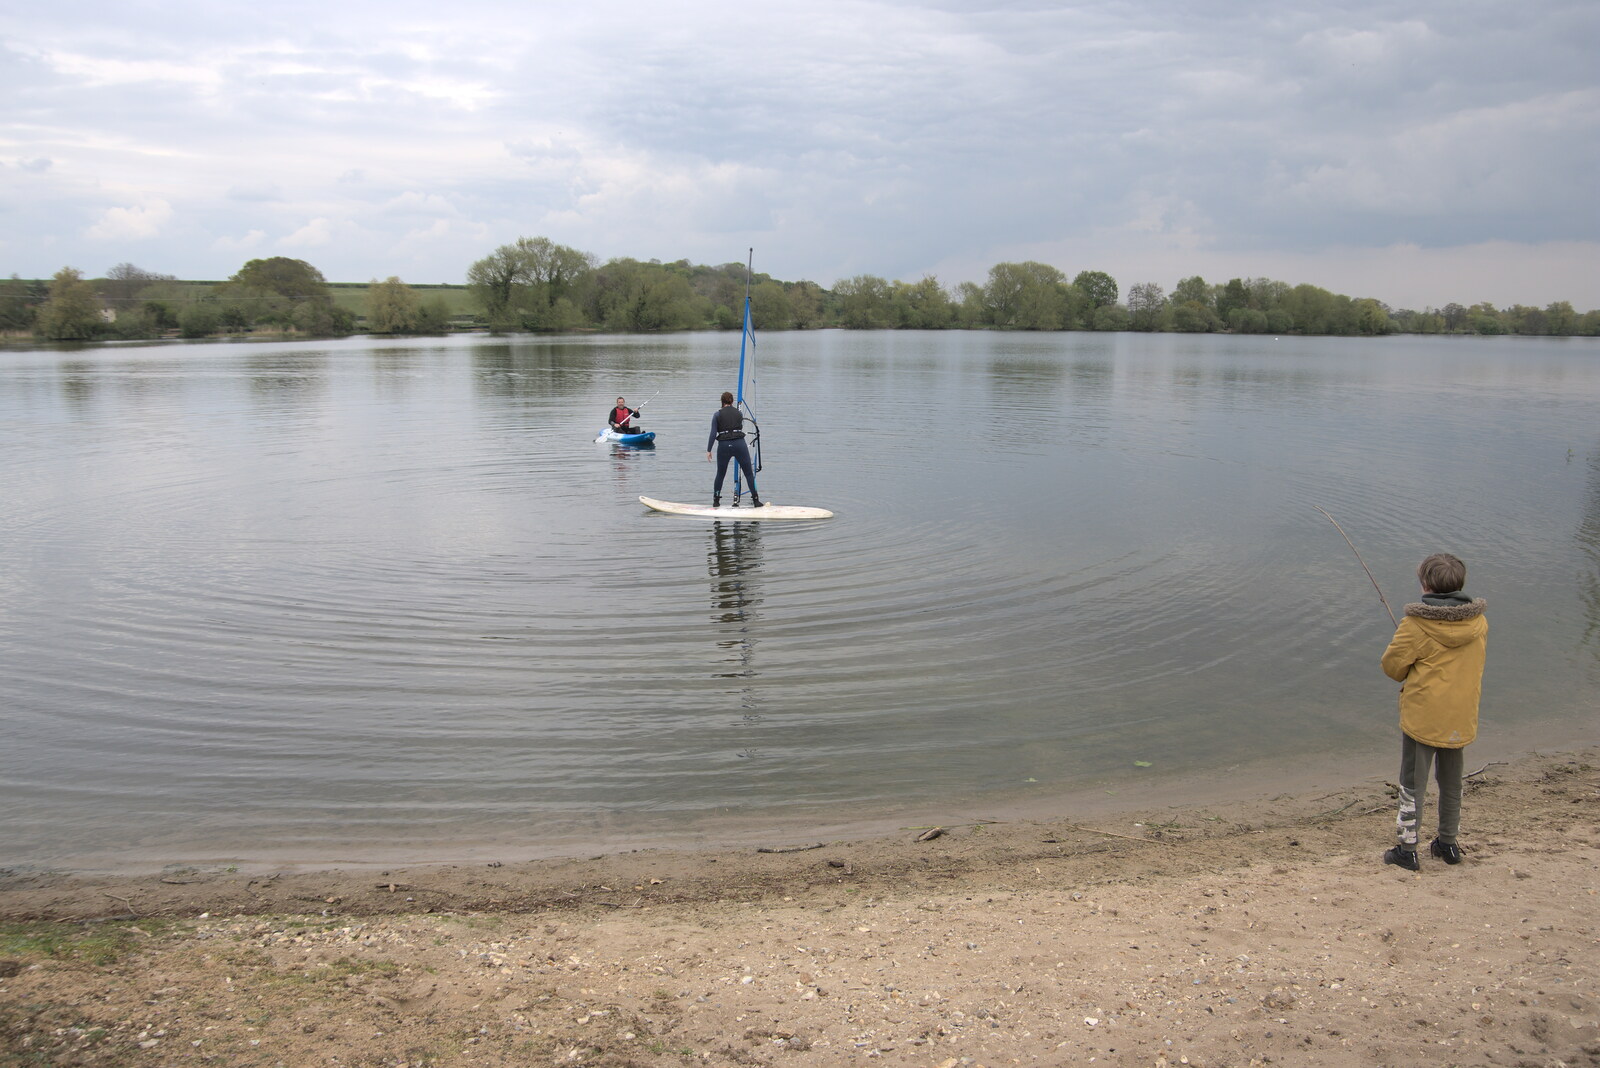 The Canoe's First Outing, Weybread Lake, Harleston - 1st May 2022: Harry watches some windsurfing